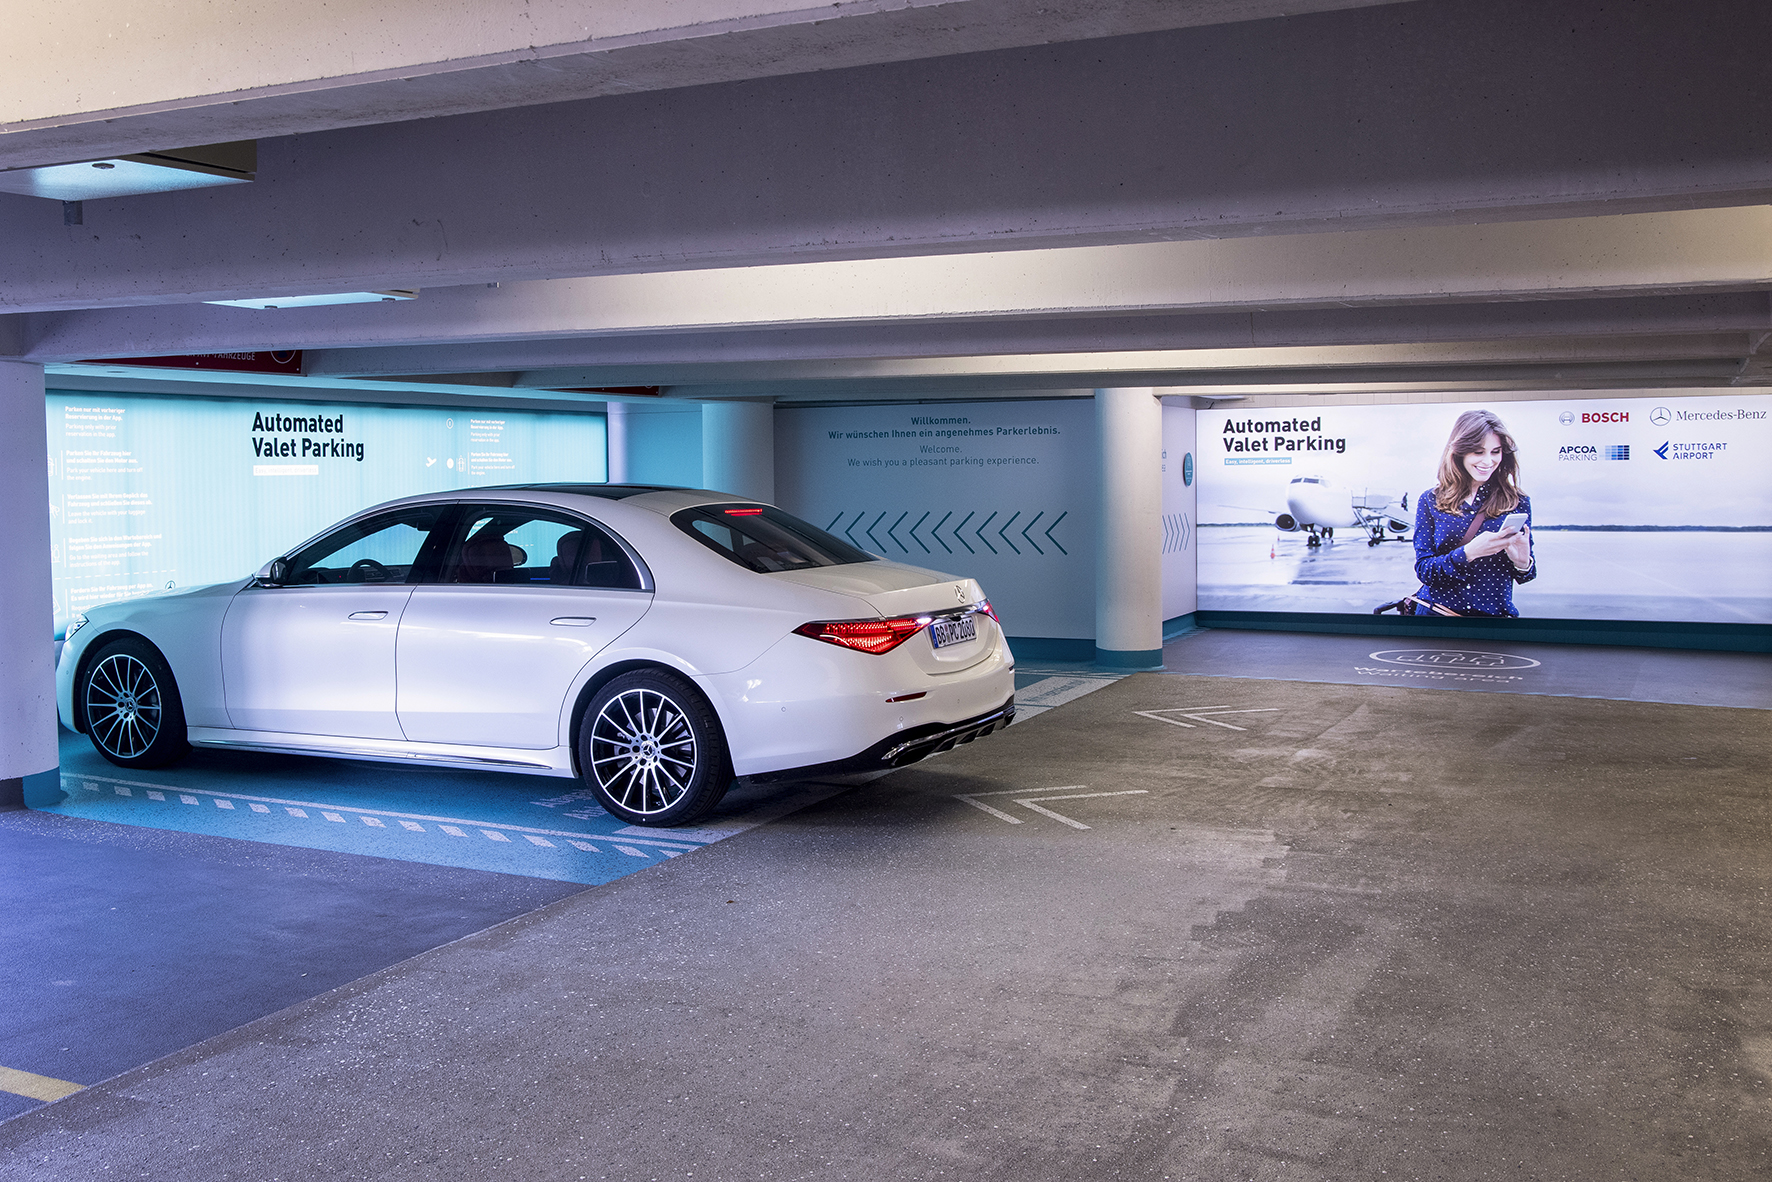 Apcoa, Bosch, and Mercedes-Benz are working to provide the world’s first commercial automated valet parking (AVP) service at Stuttgart airport 